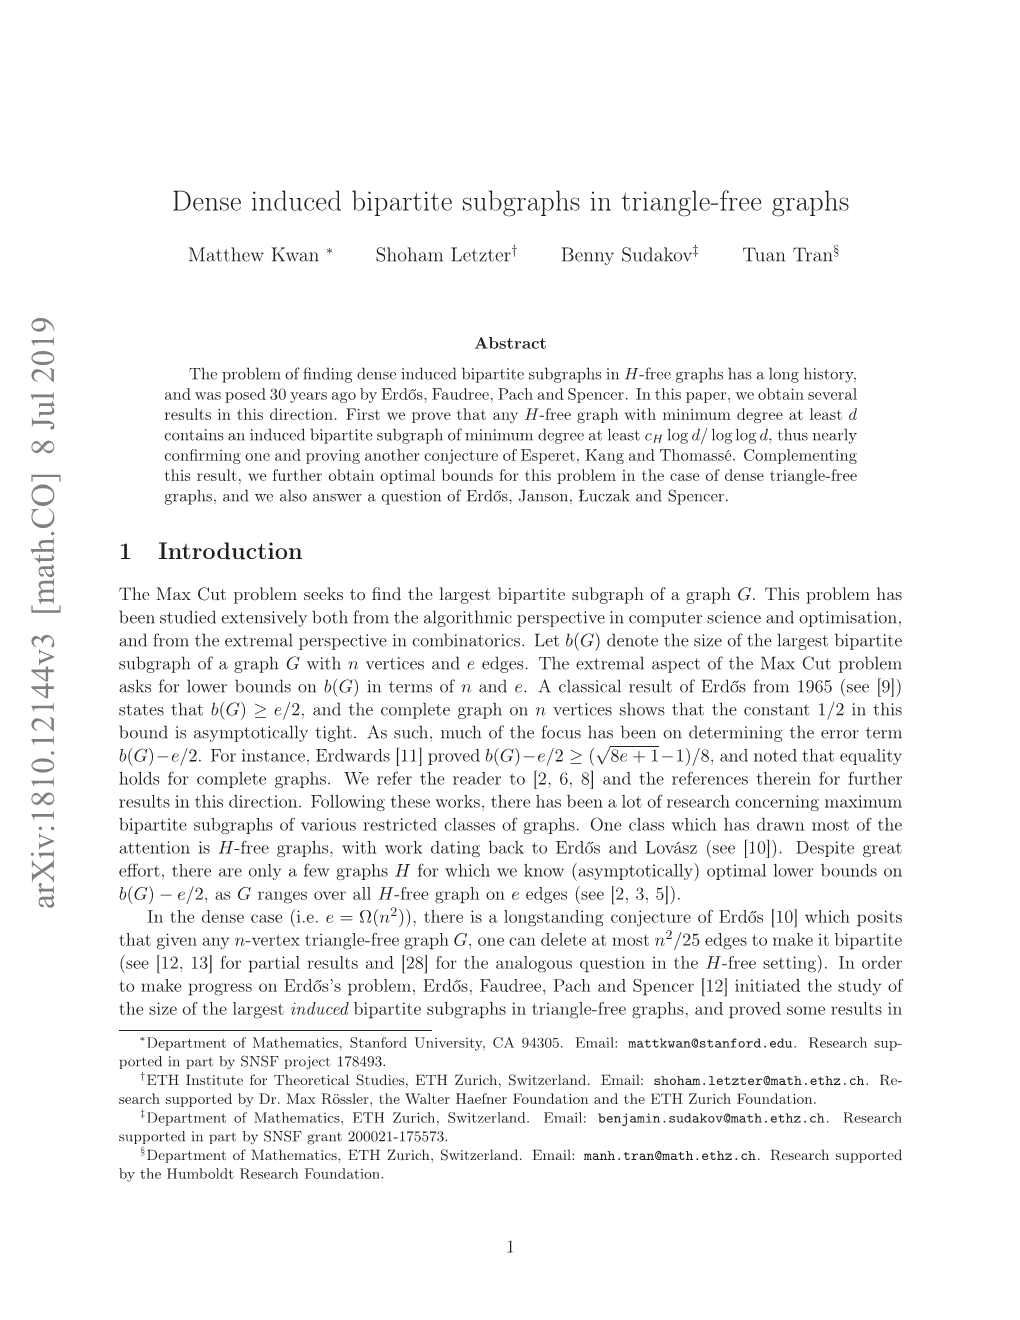 Dense Induced Bipartite Subgraphs in Triangle-Free Graphs